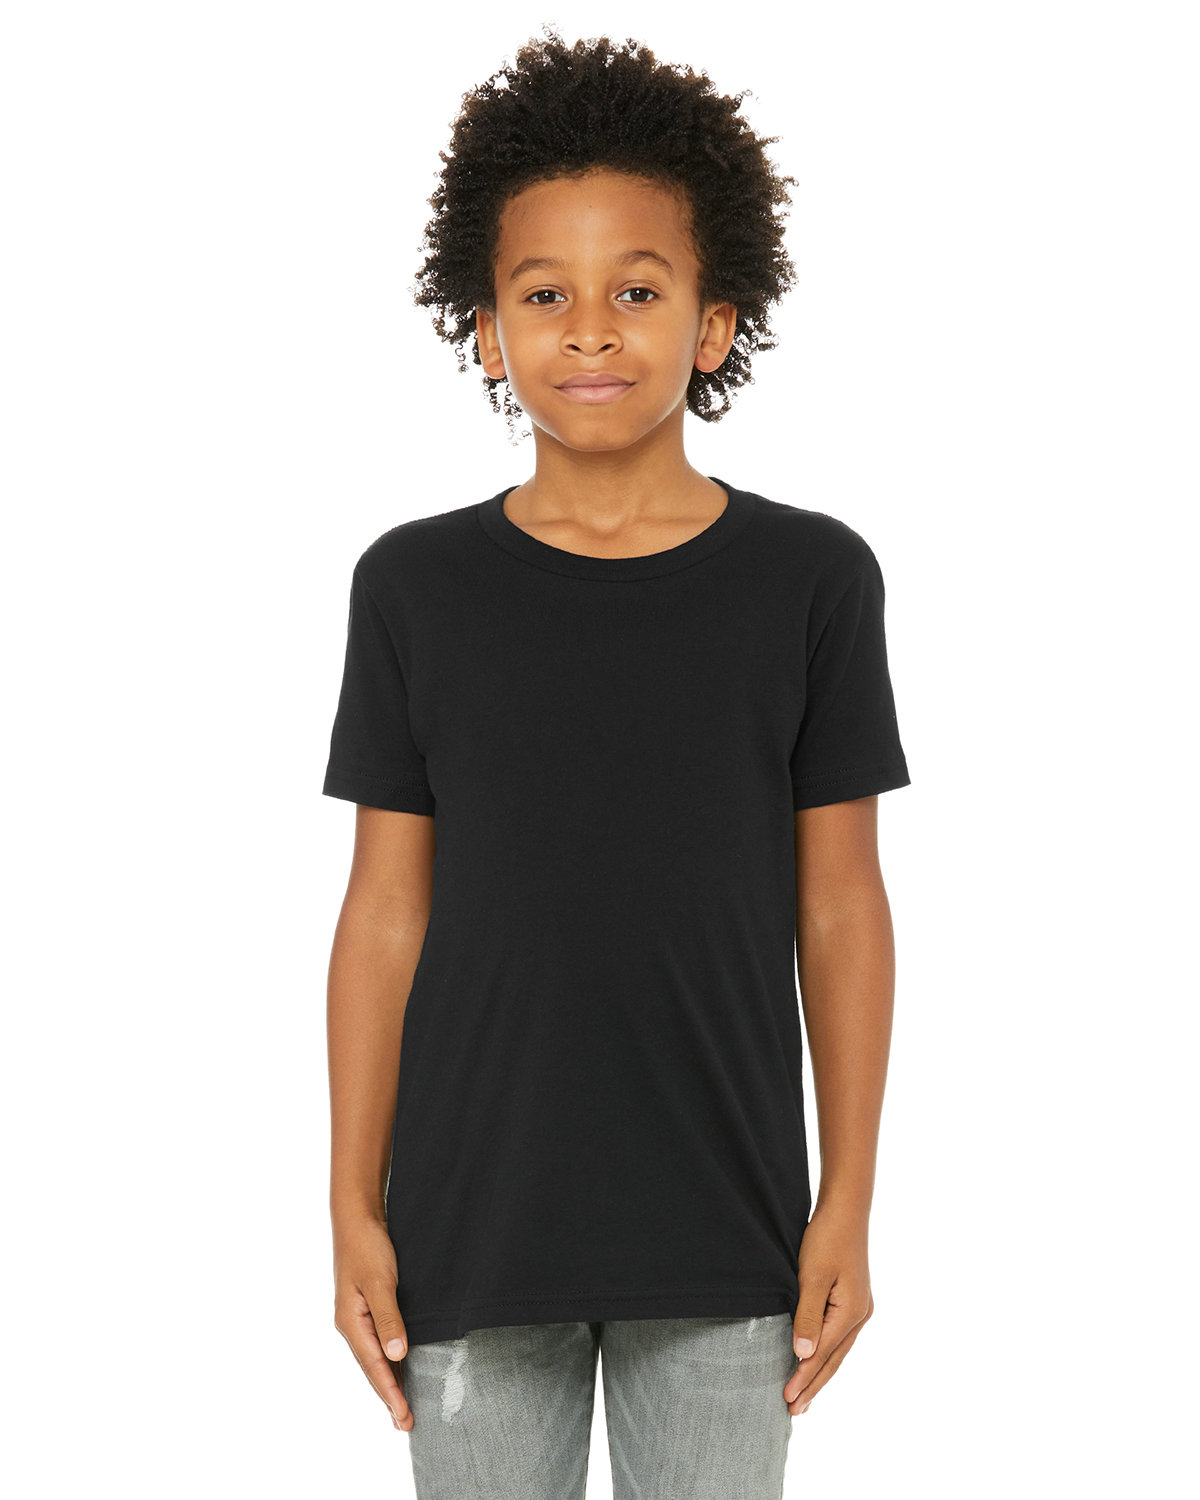 Bella + Canvas 3001Y Youth Jersey T-Shirt–Black (S)